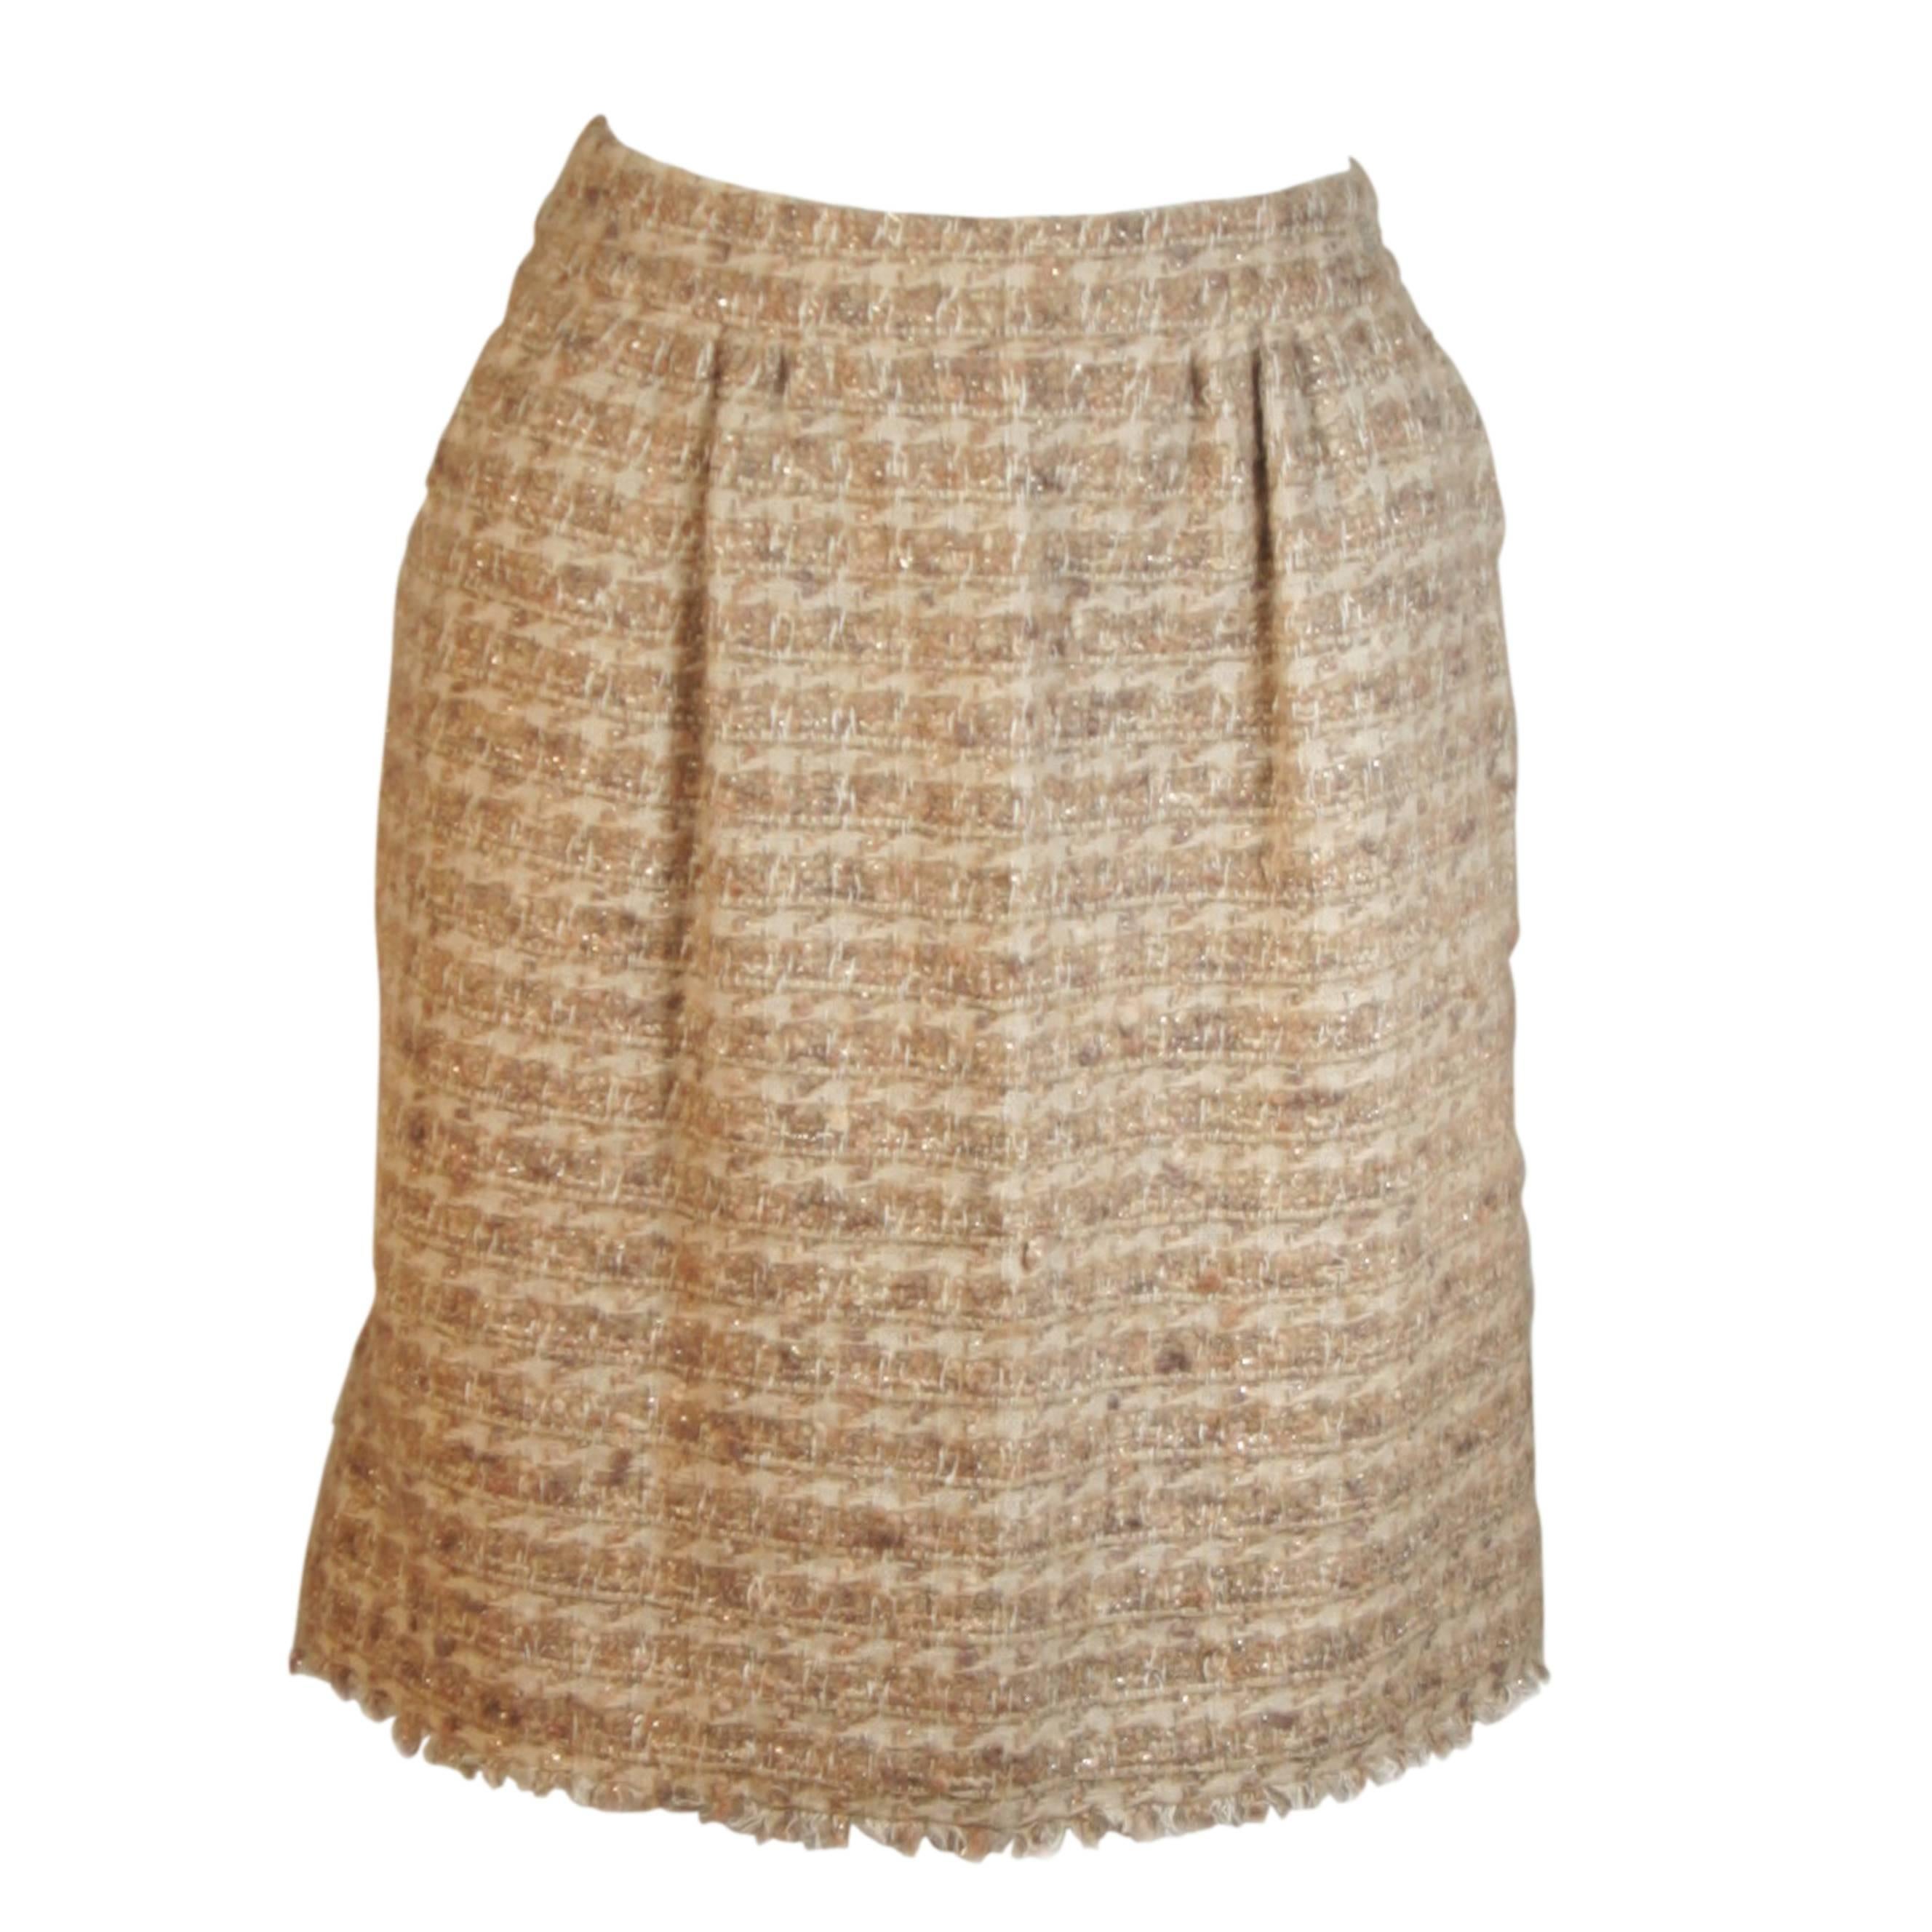 CHANEL Nude Tweed Knee Length Skirt with Brown Metallic Detail Size 6-8